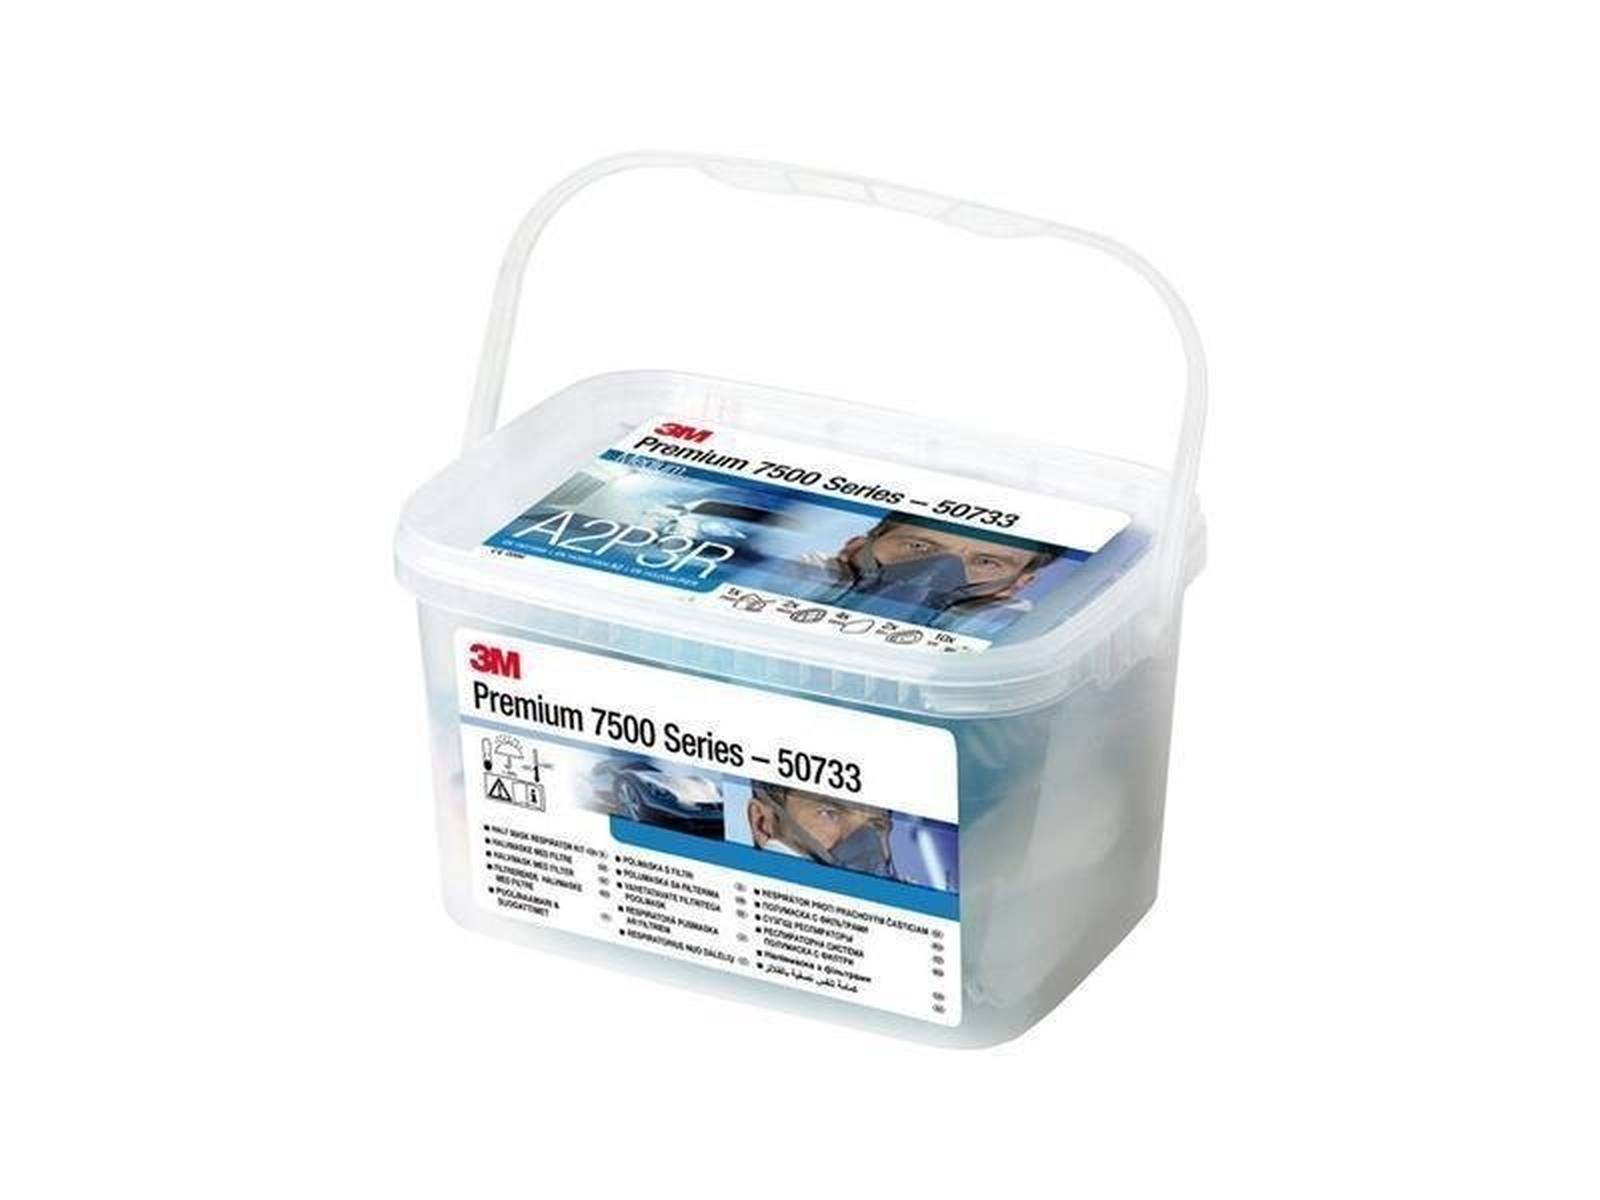 3M painting mask set incl. 1x 7502M silicone mask, 2x 6055 filters, 4x 5935 filters, 2x 501 filter caps, 10x 105 wipes in storage box #50733